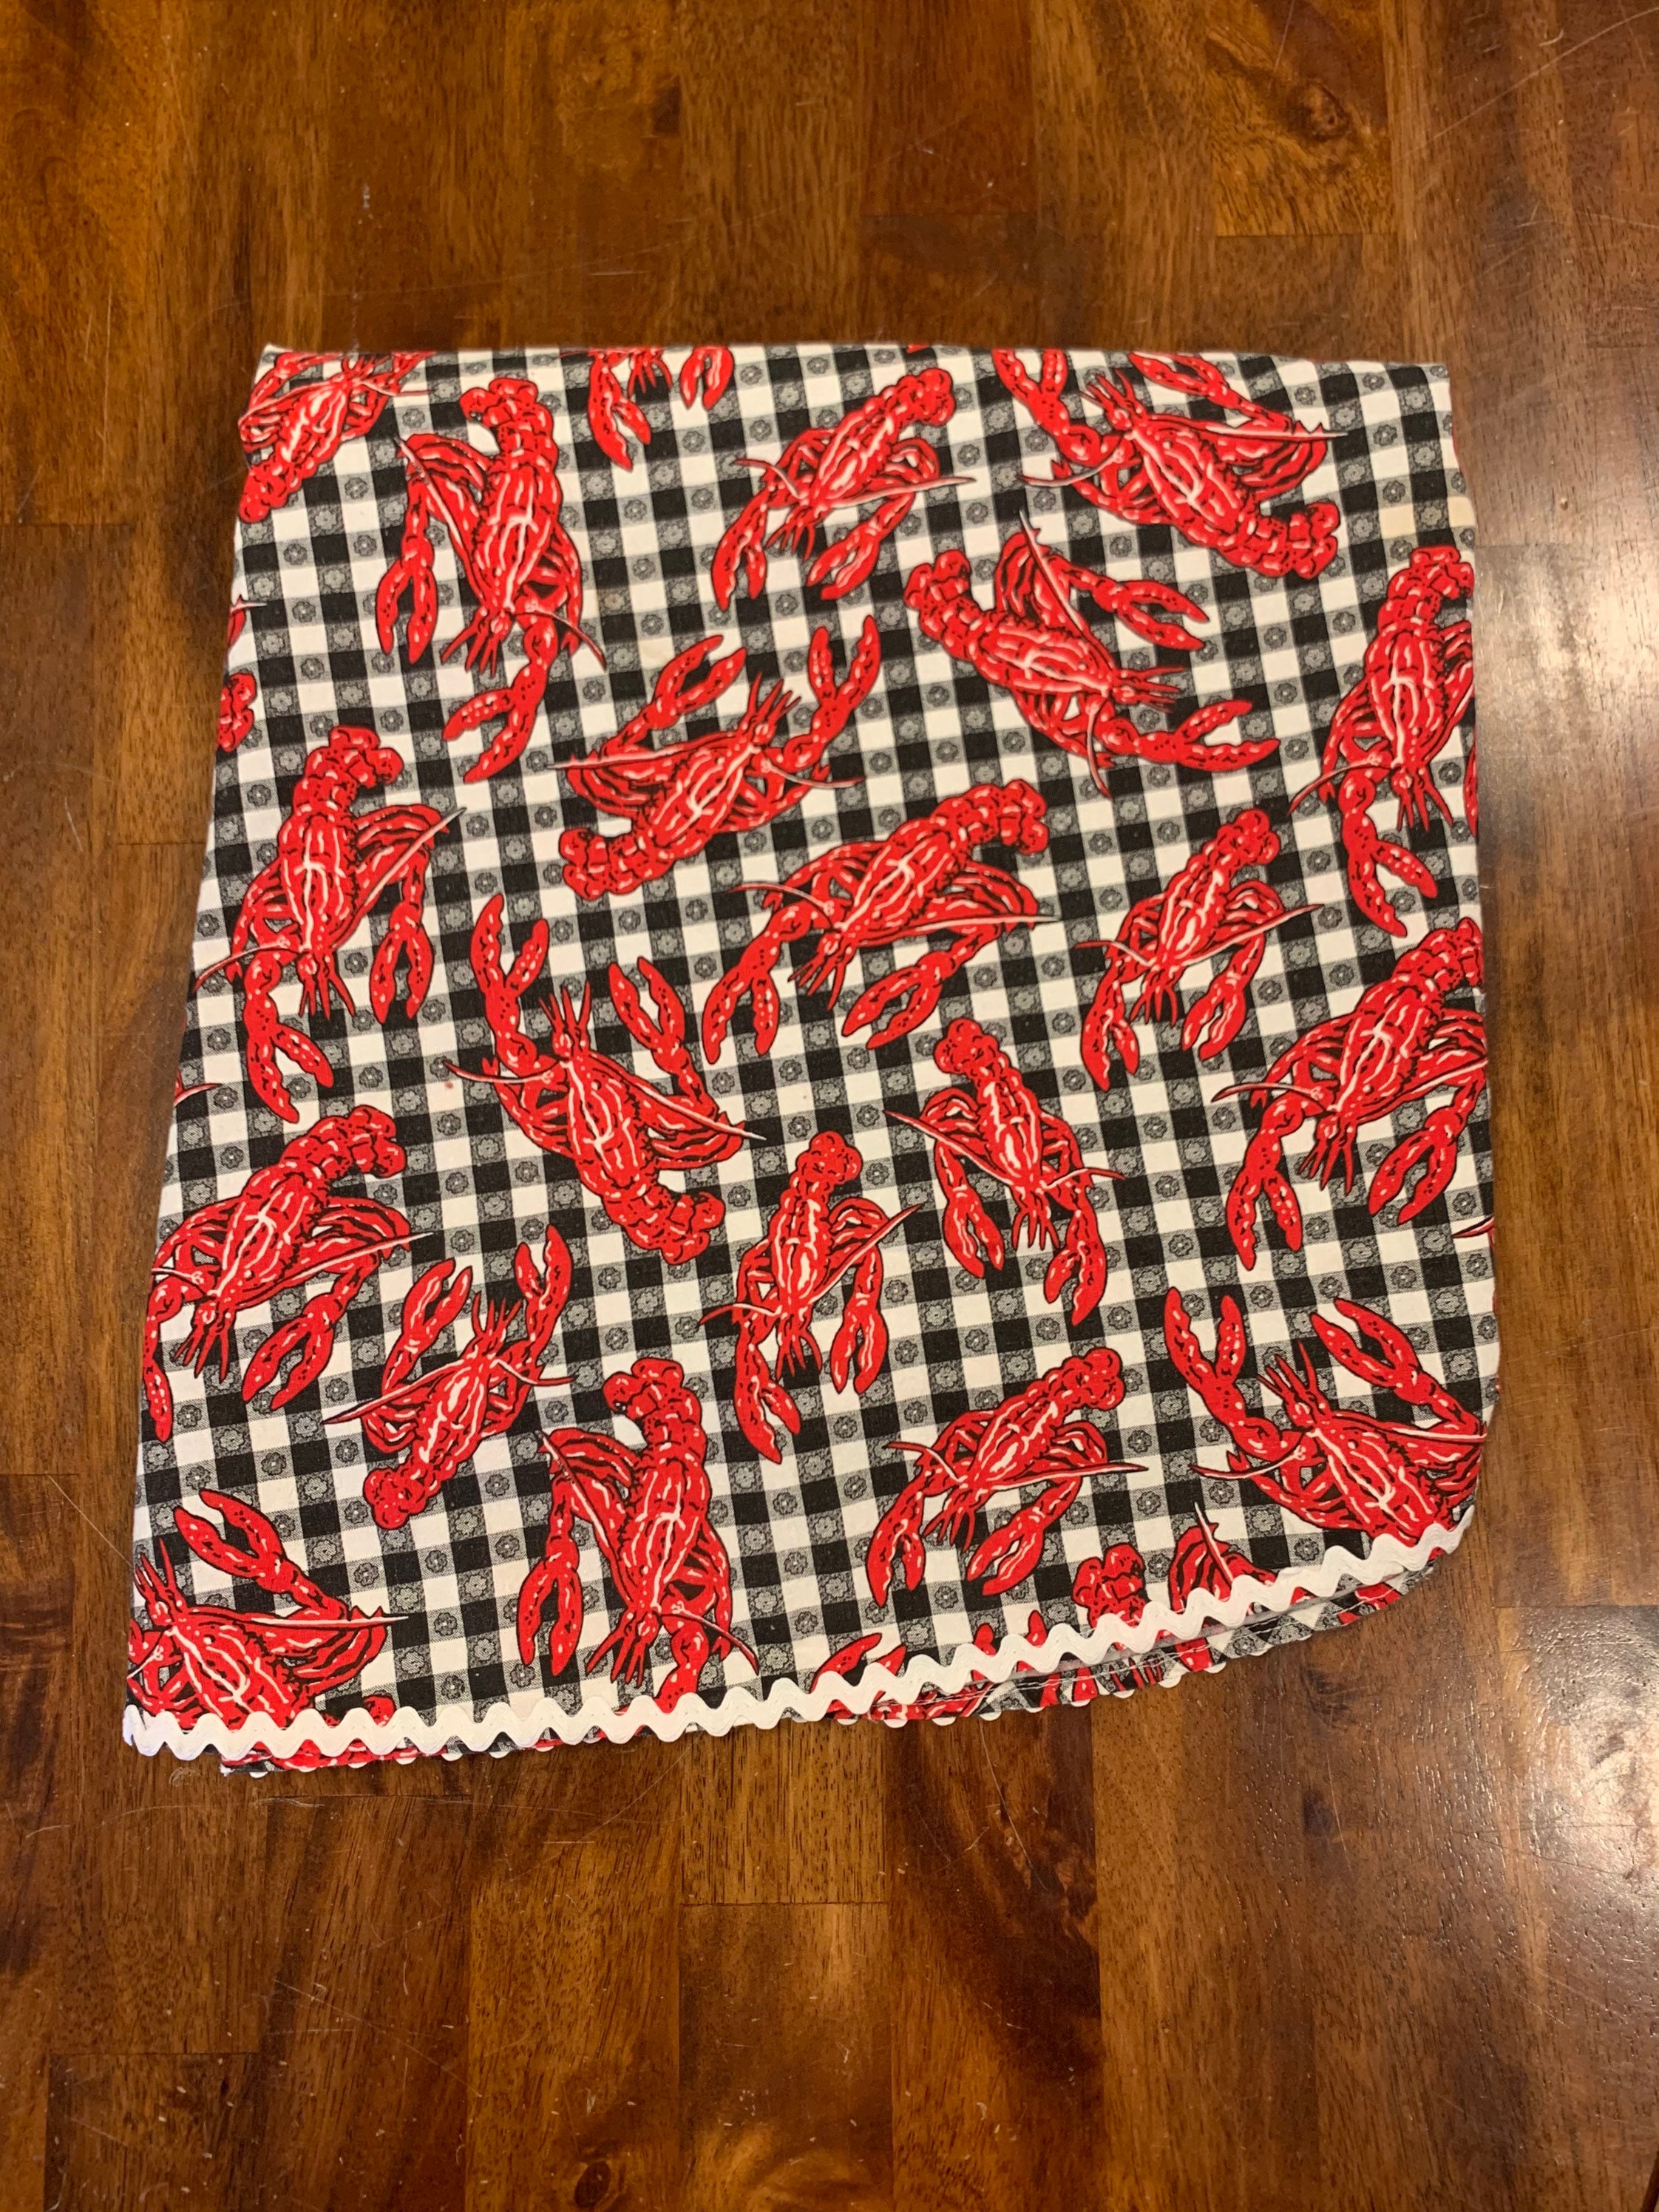 Lobster Tablecloth. Beach Round Picnic Seafood Gingham Nautical Tablecloth